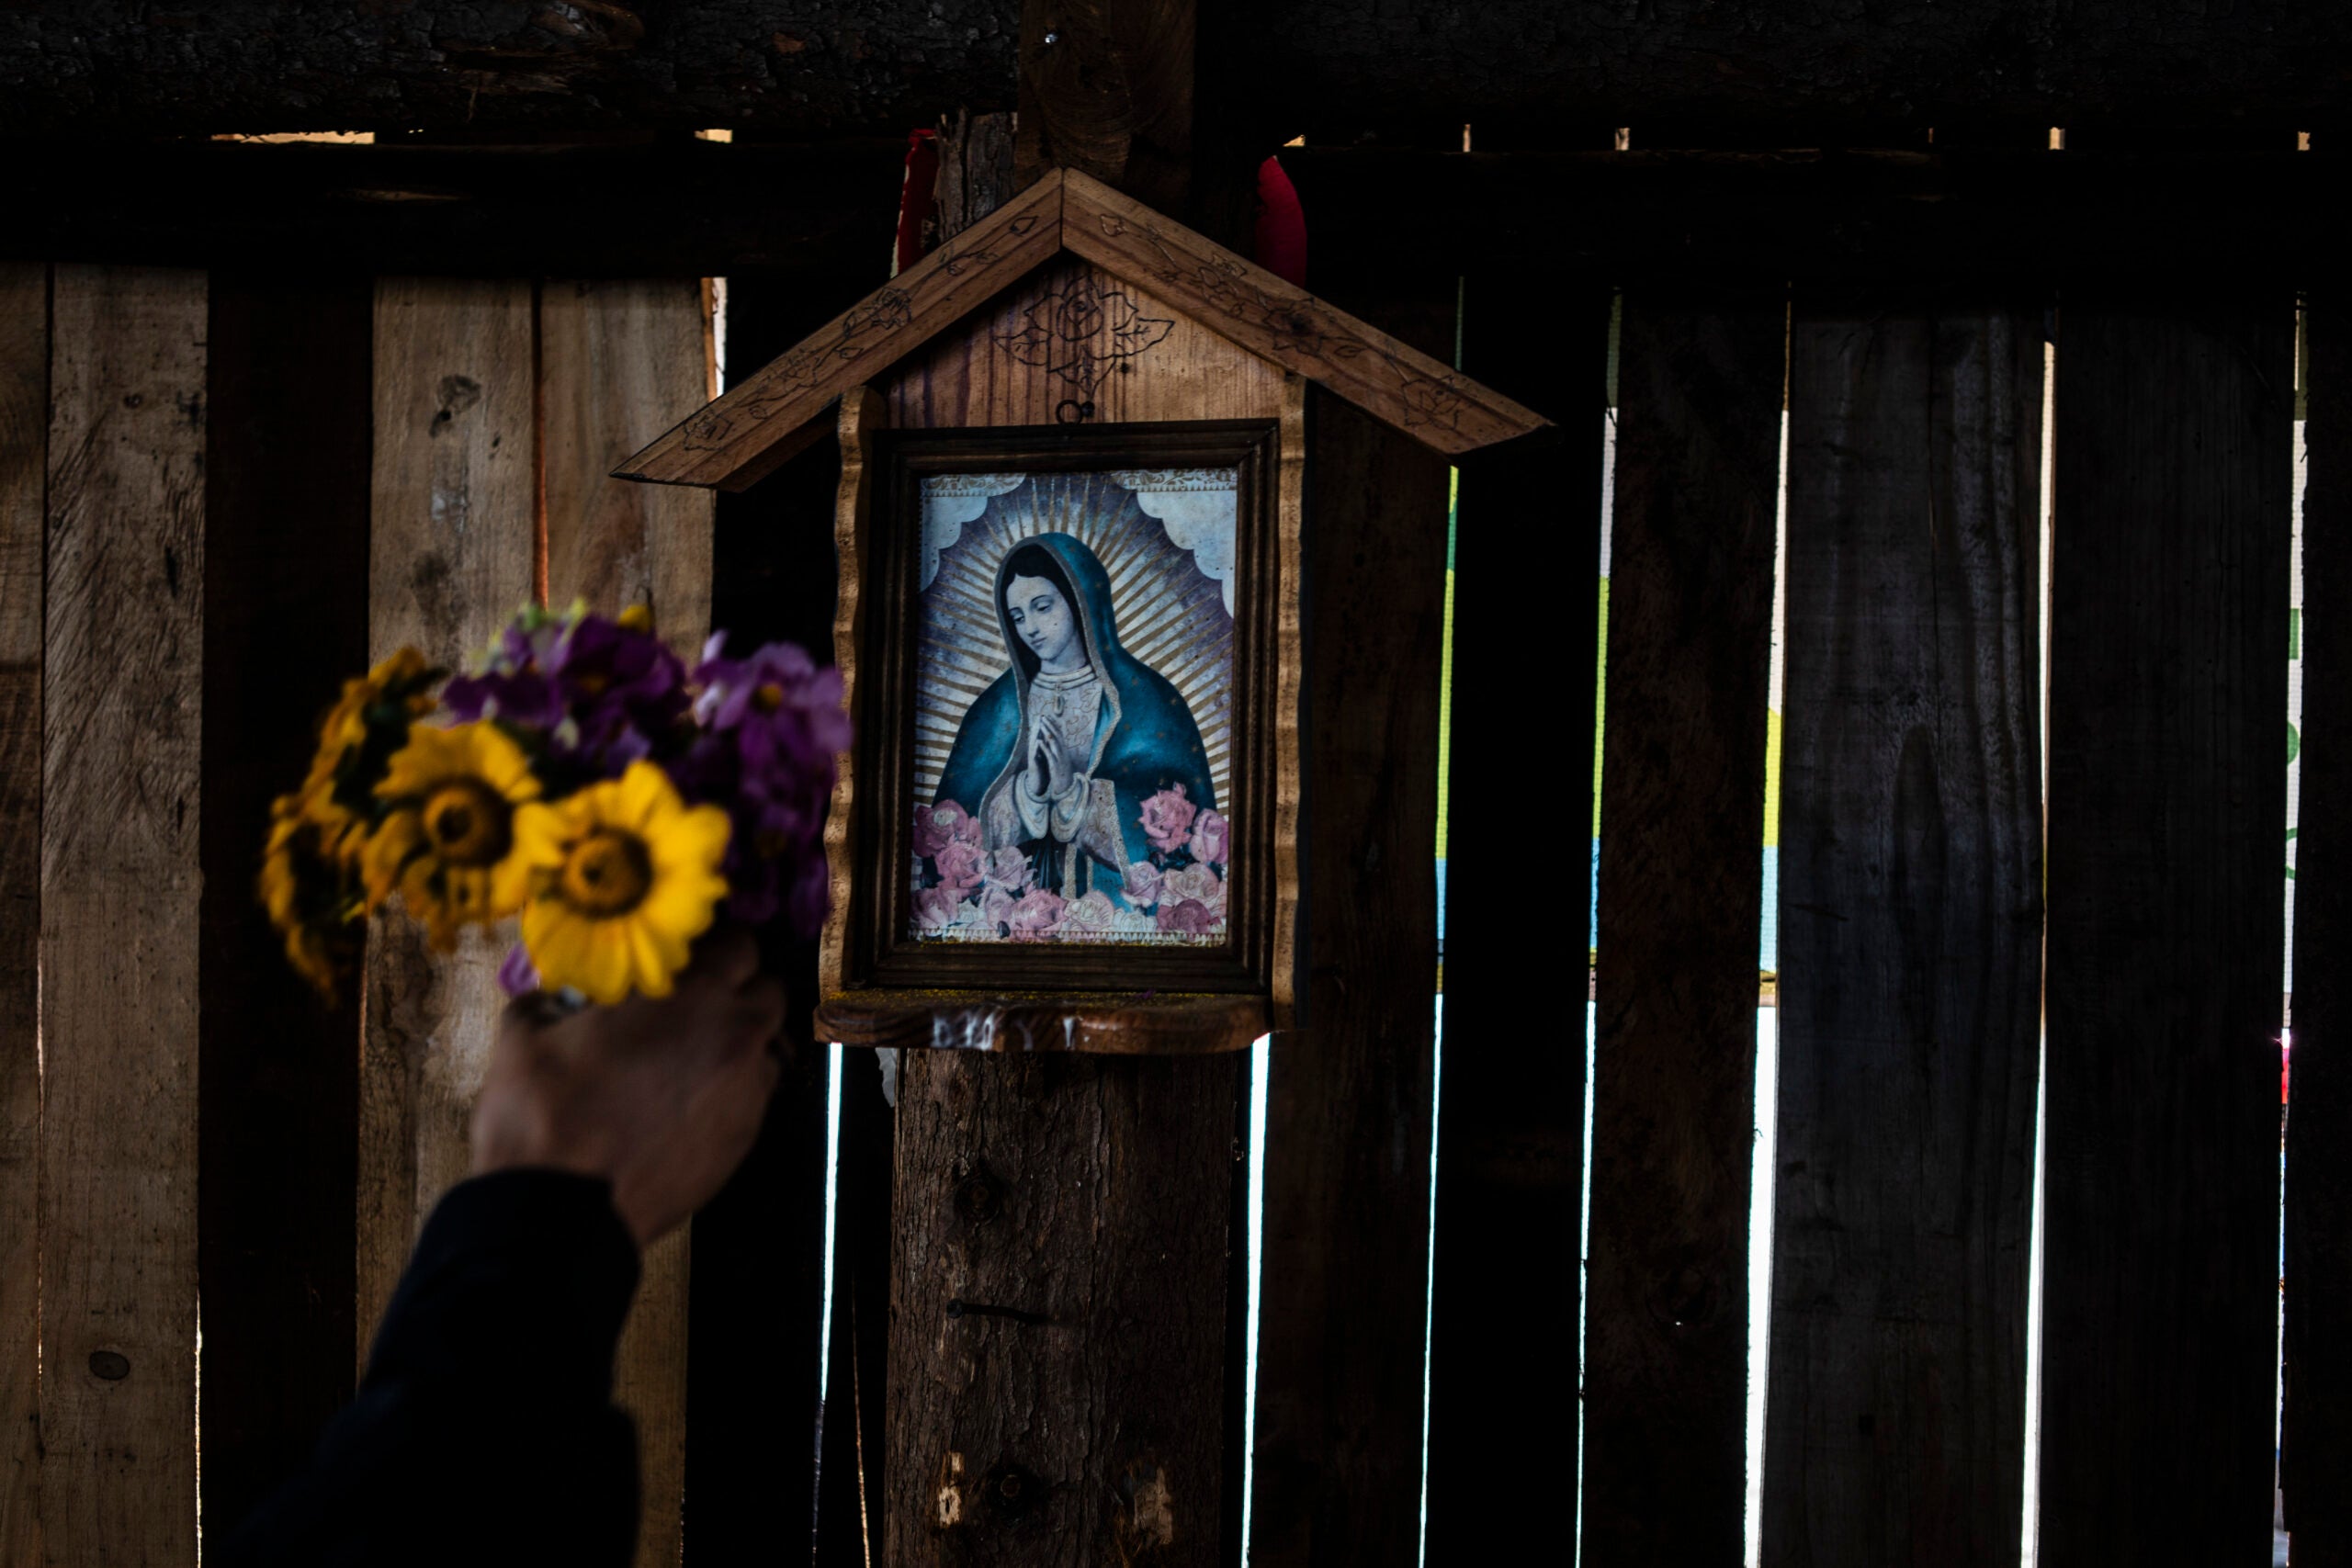 An unidentified environmental activist places flowers on an image of the Virgin of Guadalupe in the state of Michoacán, Mexico. 